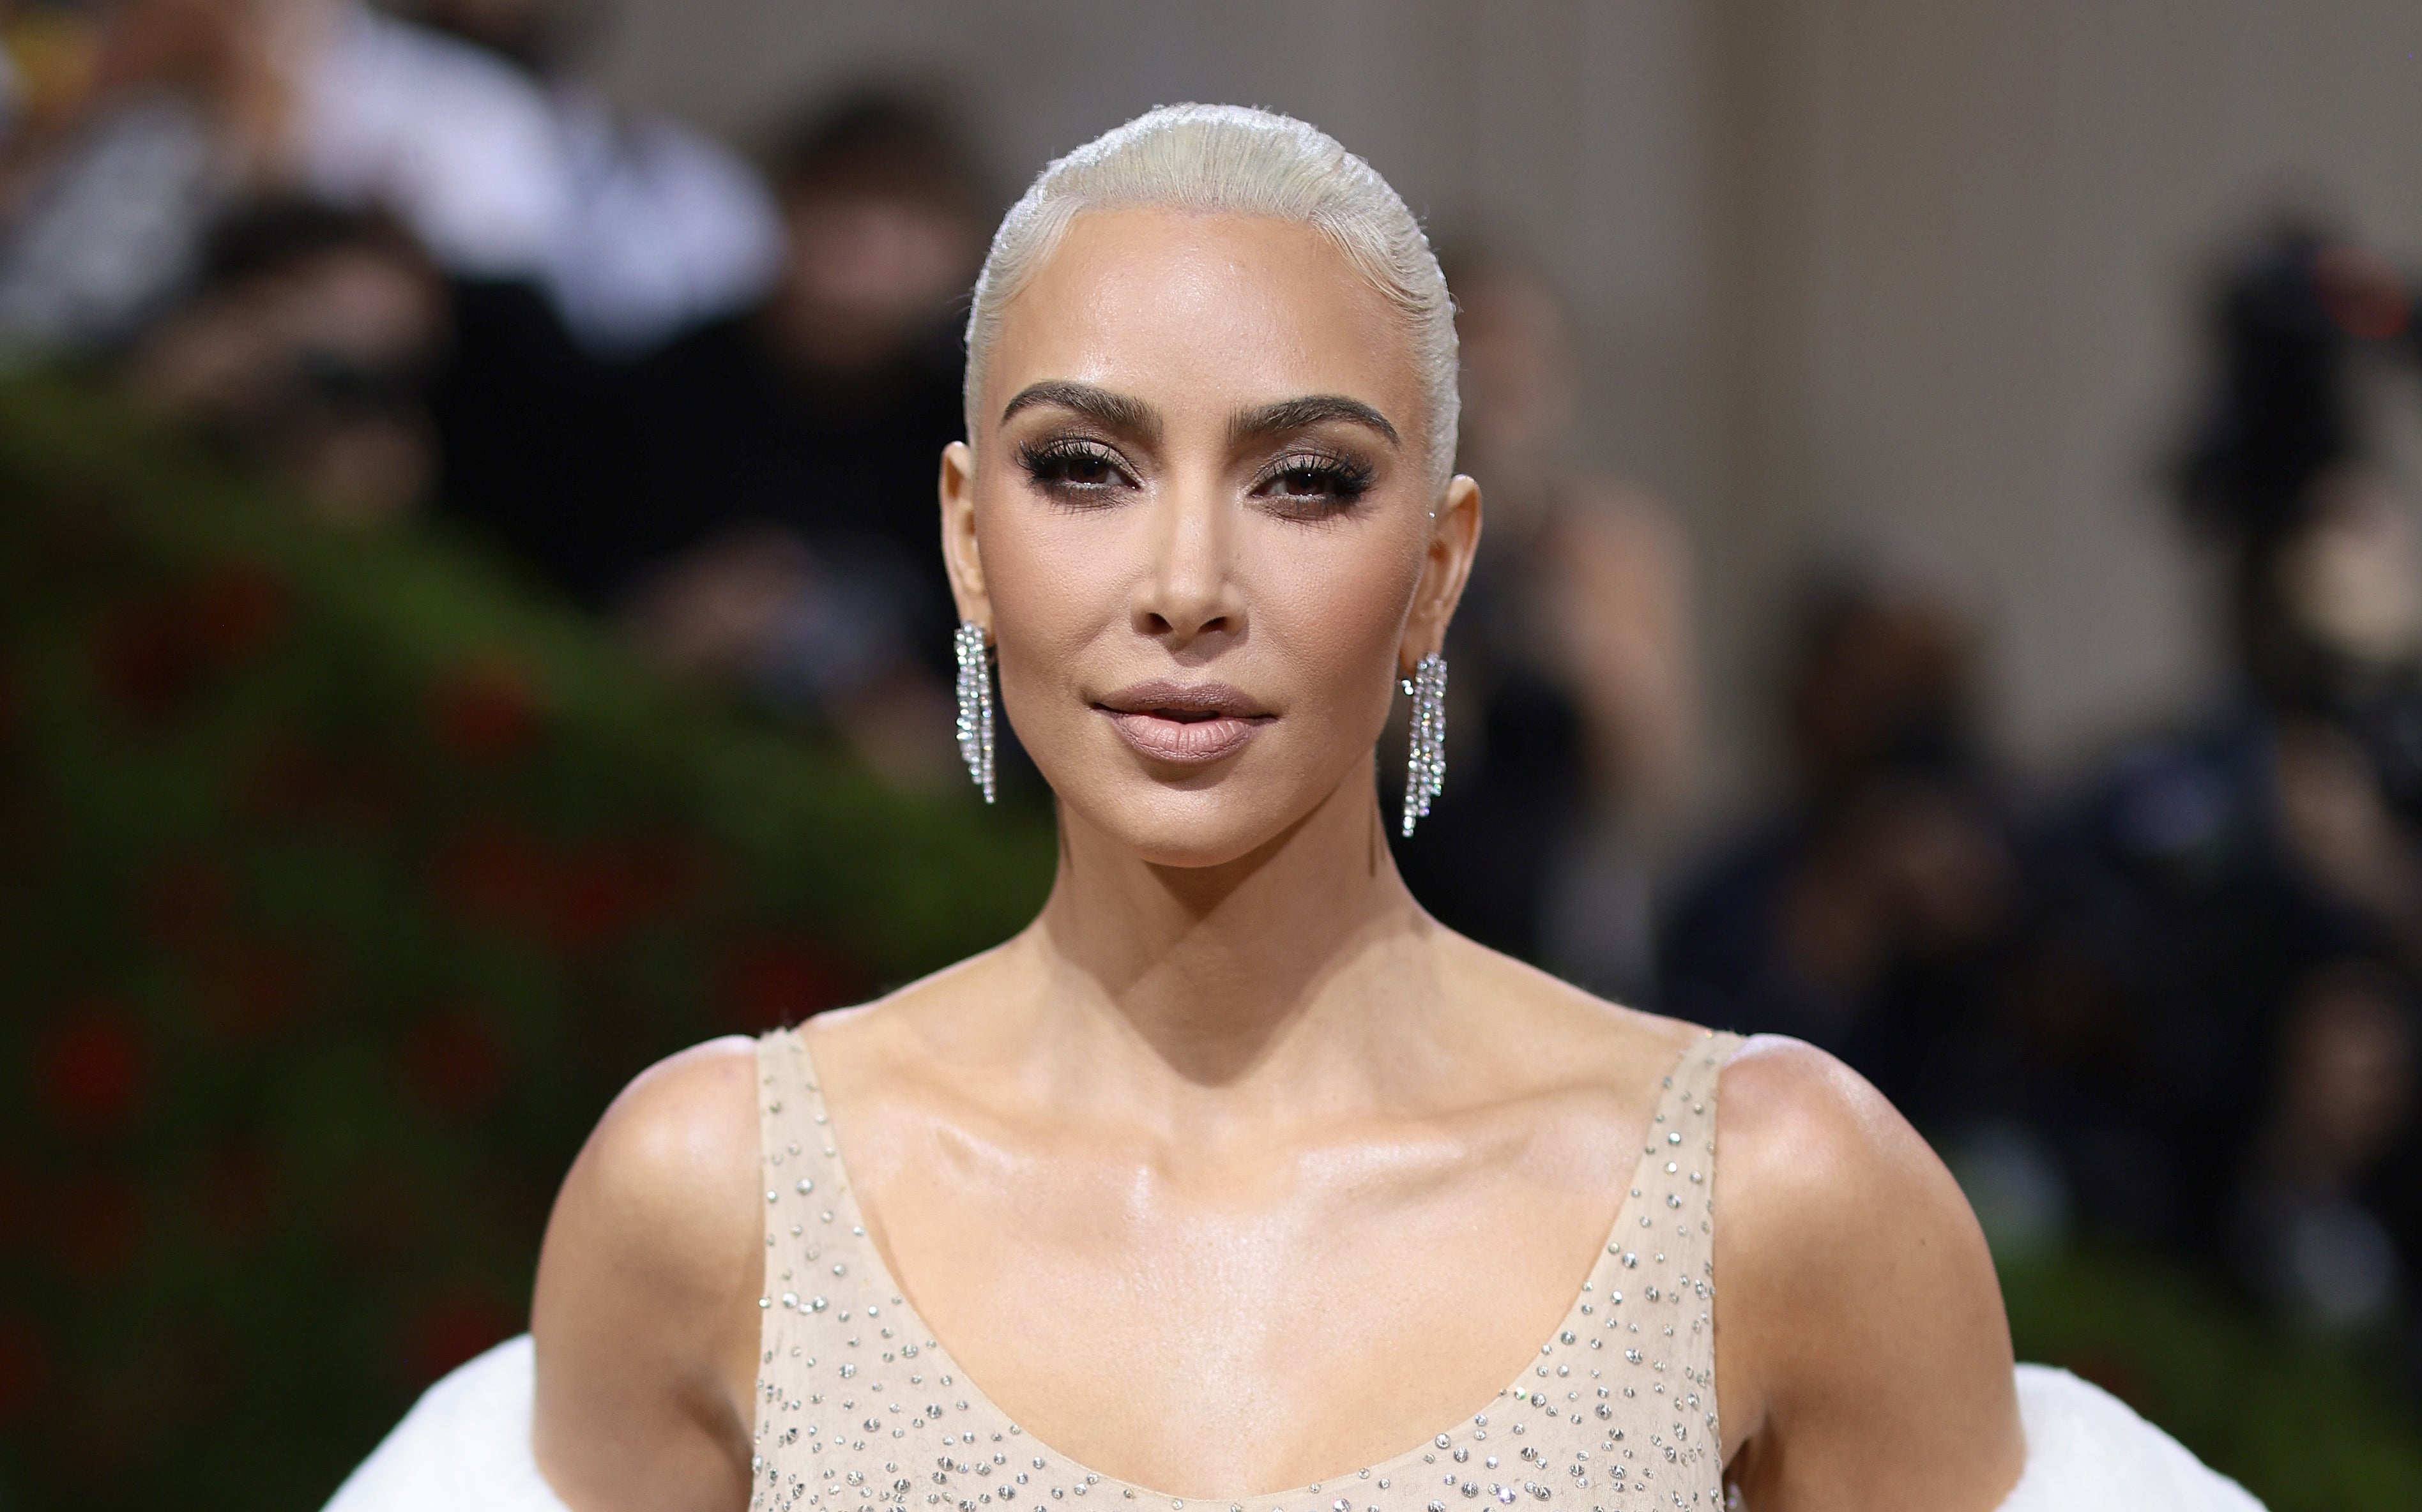 Kim Kardashian doubles-down on claim she would ‘eat poop’ if it meant looking younger